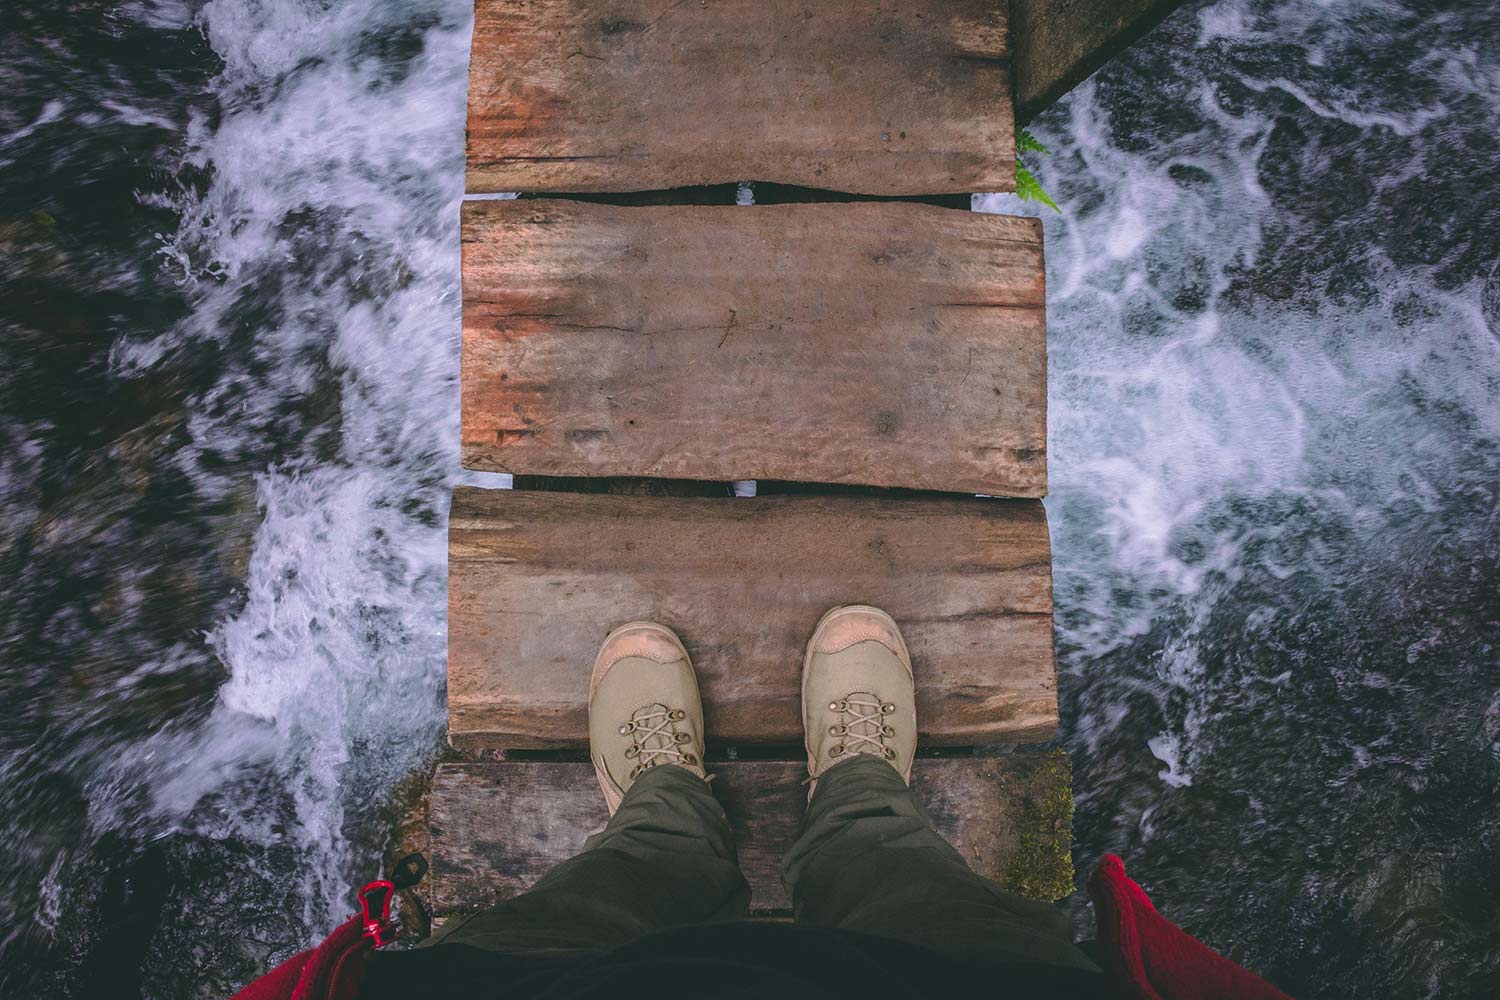 View down at a person's feet as they stand on a wooden plank bridge over a foaming river.